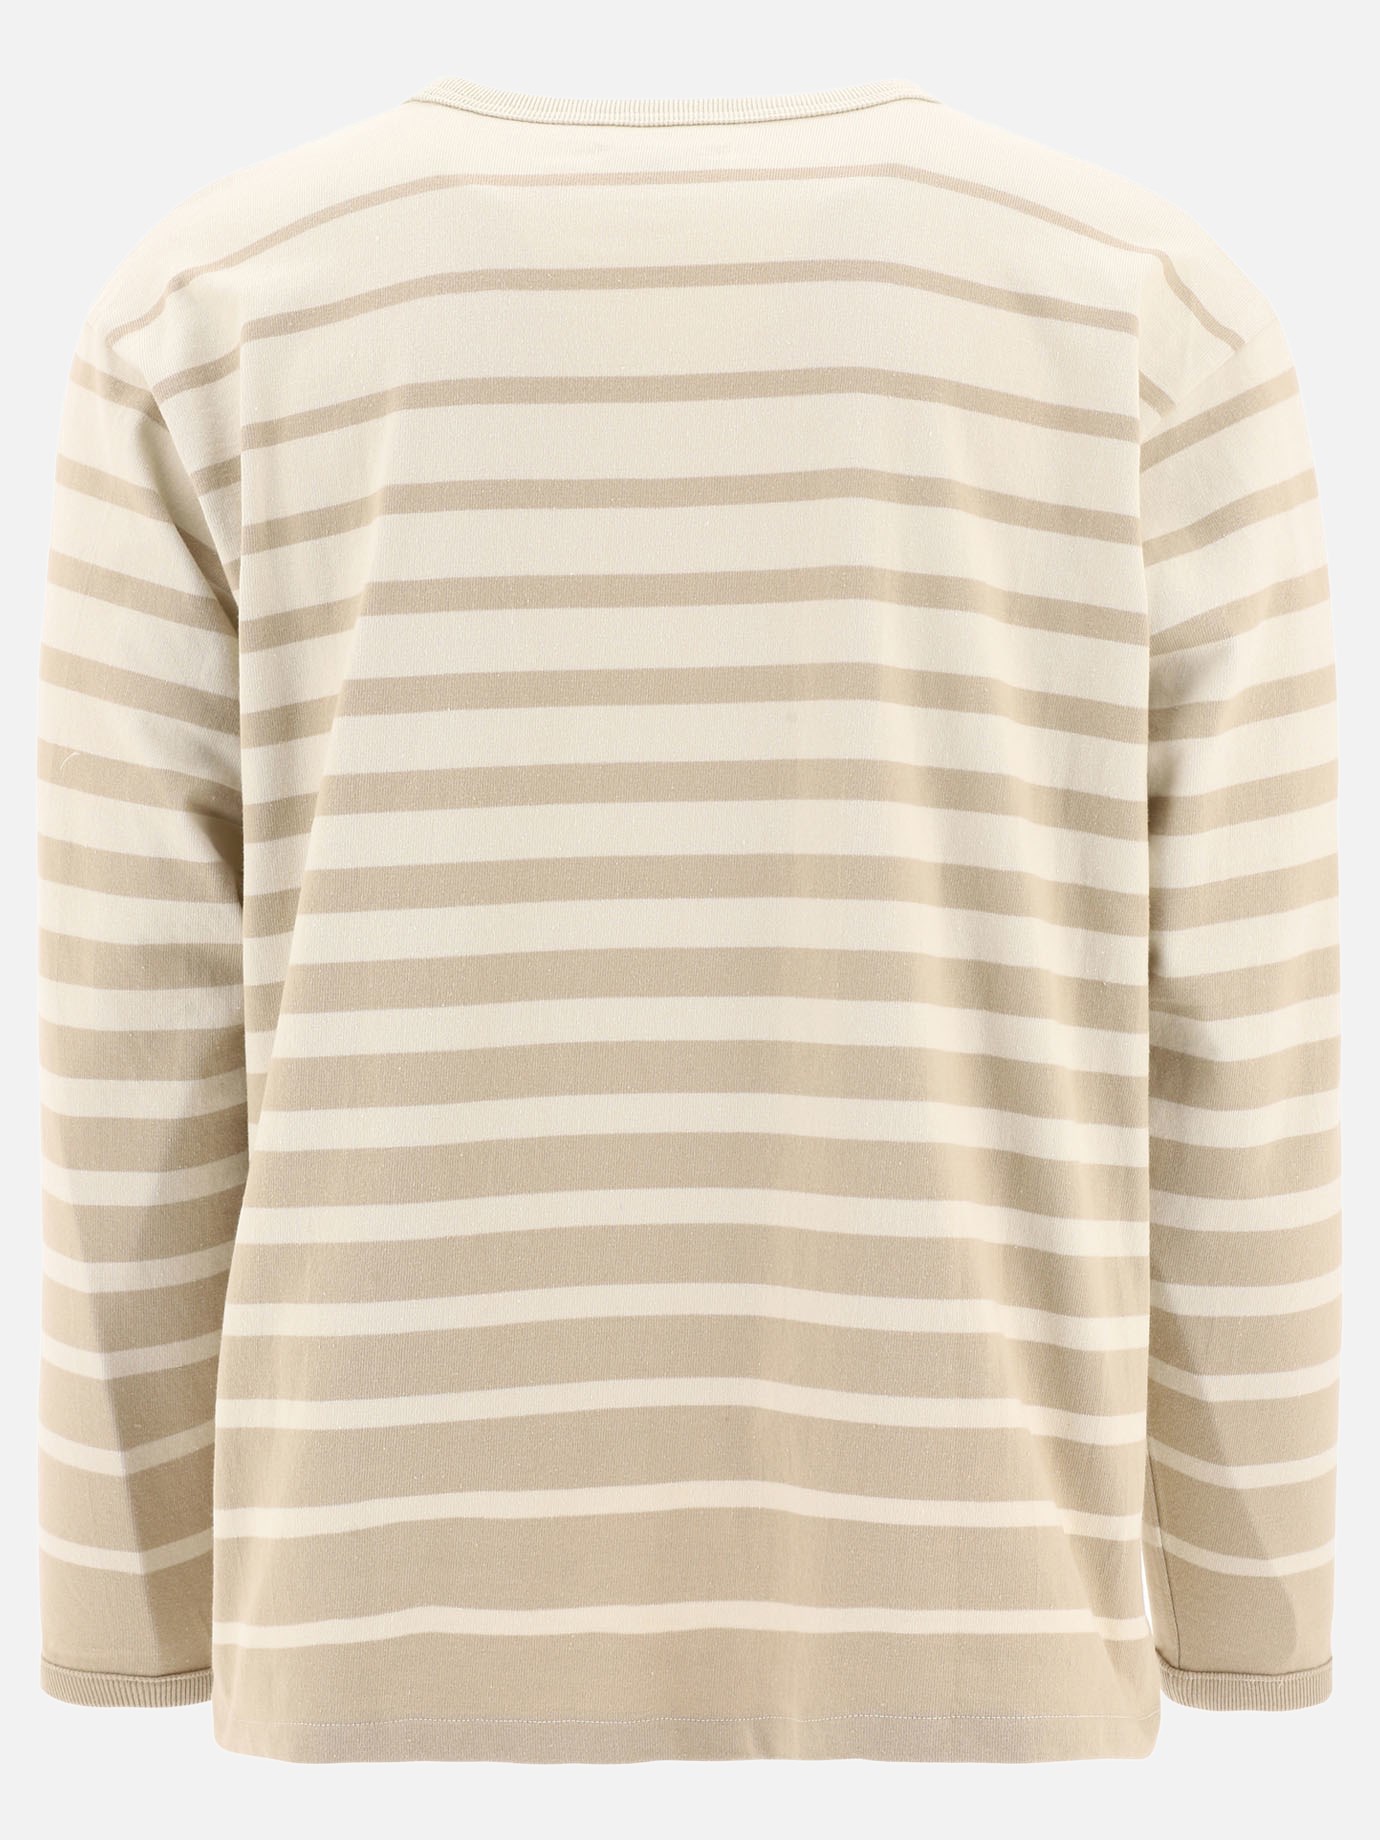 Striped t-shirt by Levi's Made & Crafted